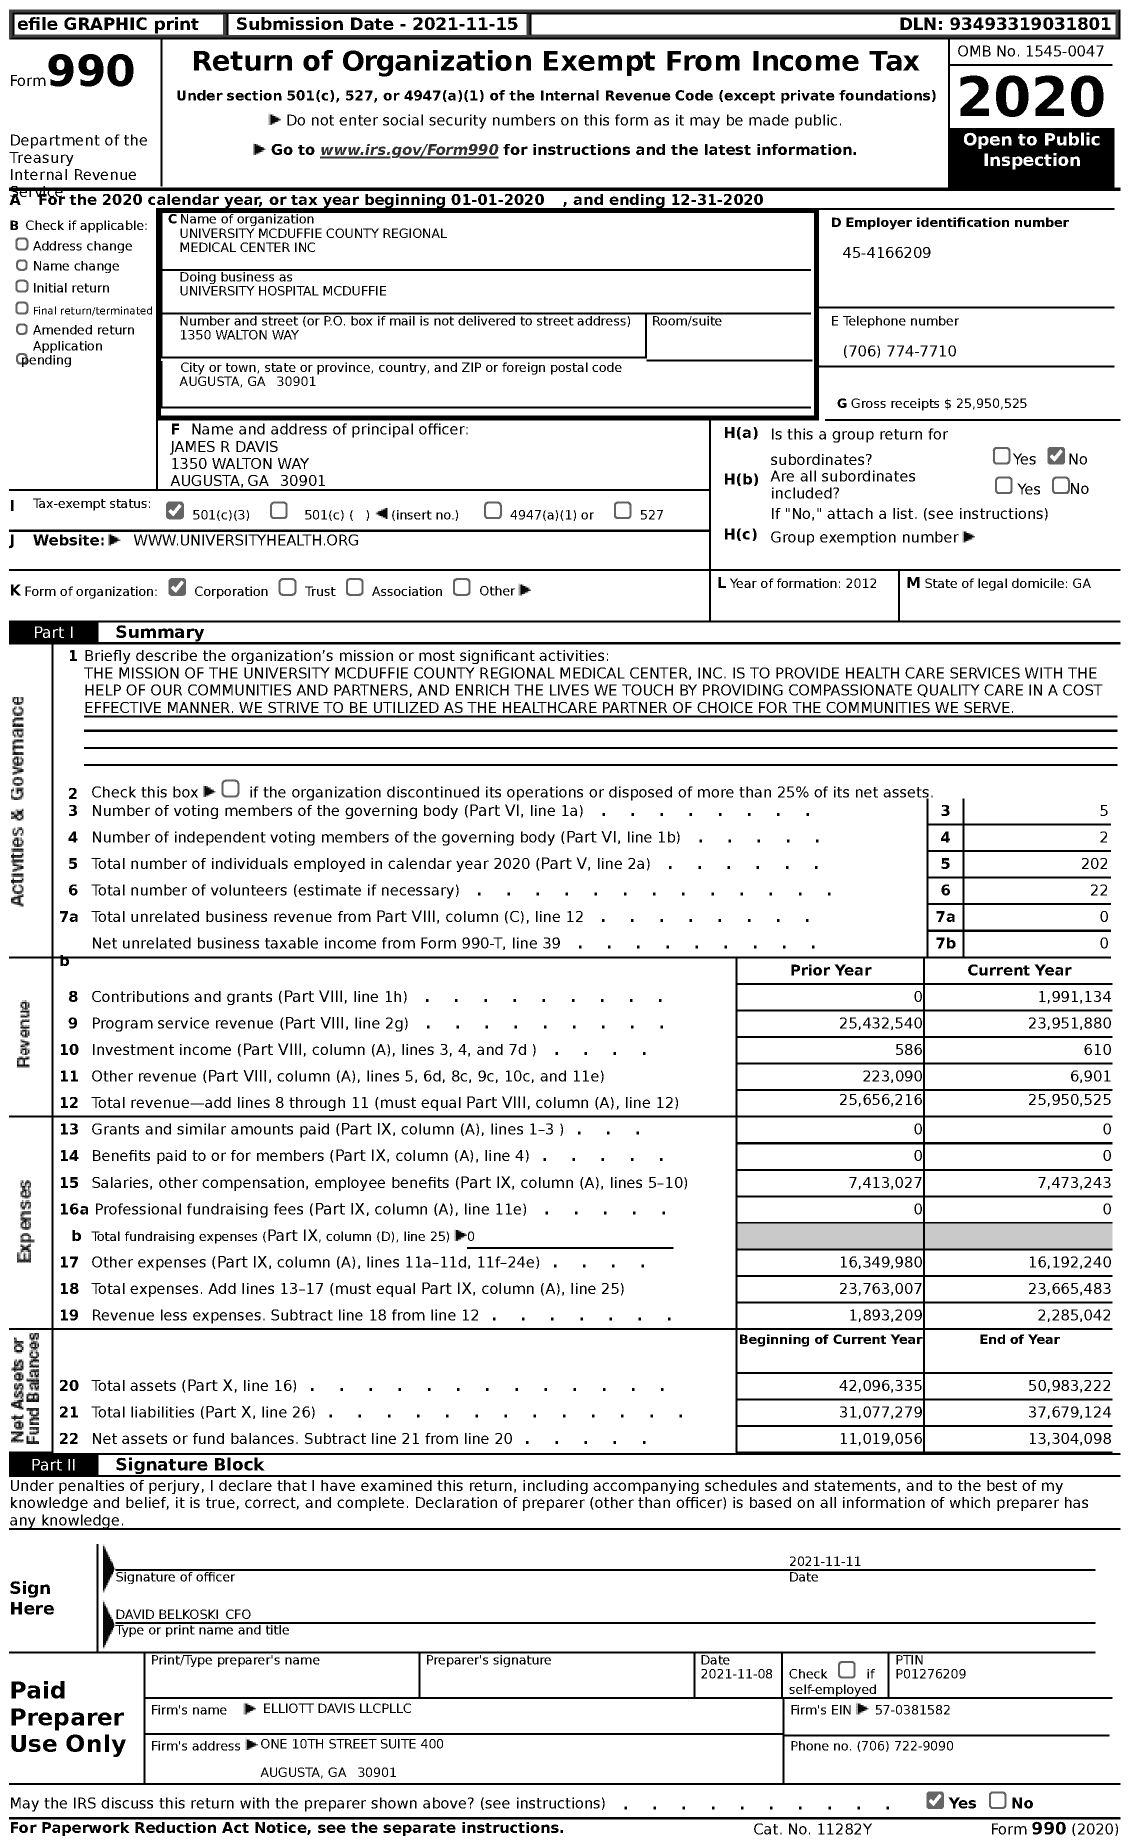 Image of first page of 2020 Form 990 for University Hospital McDuffie (UHM)